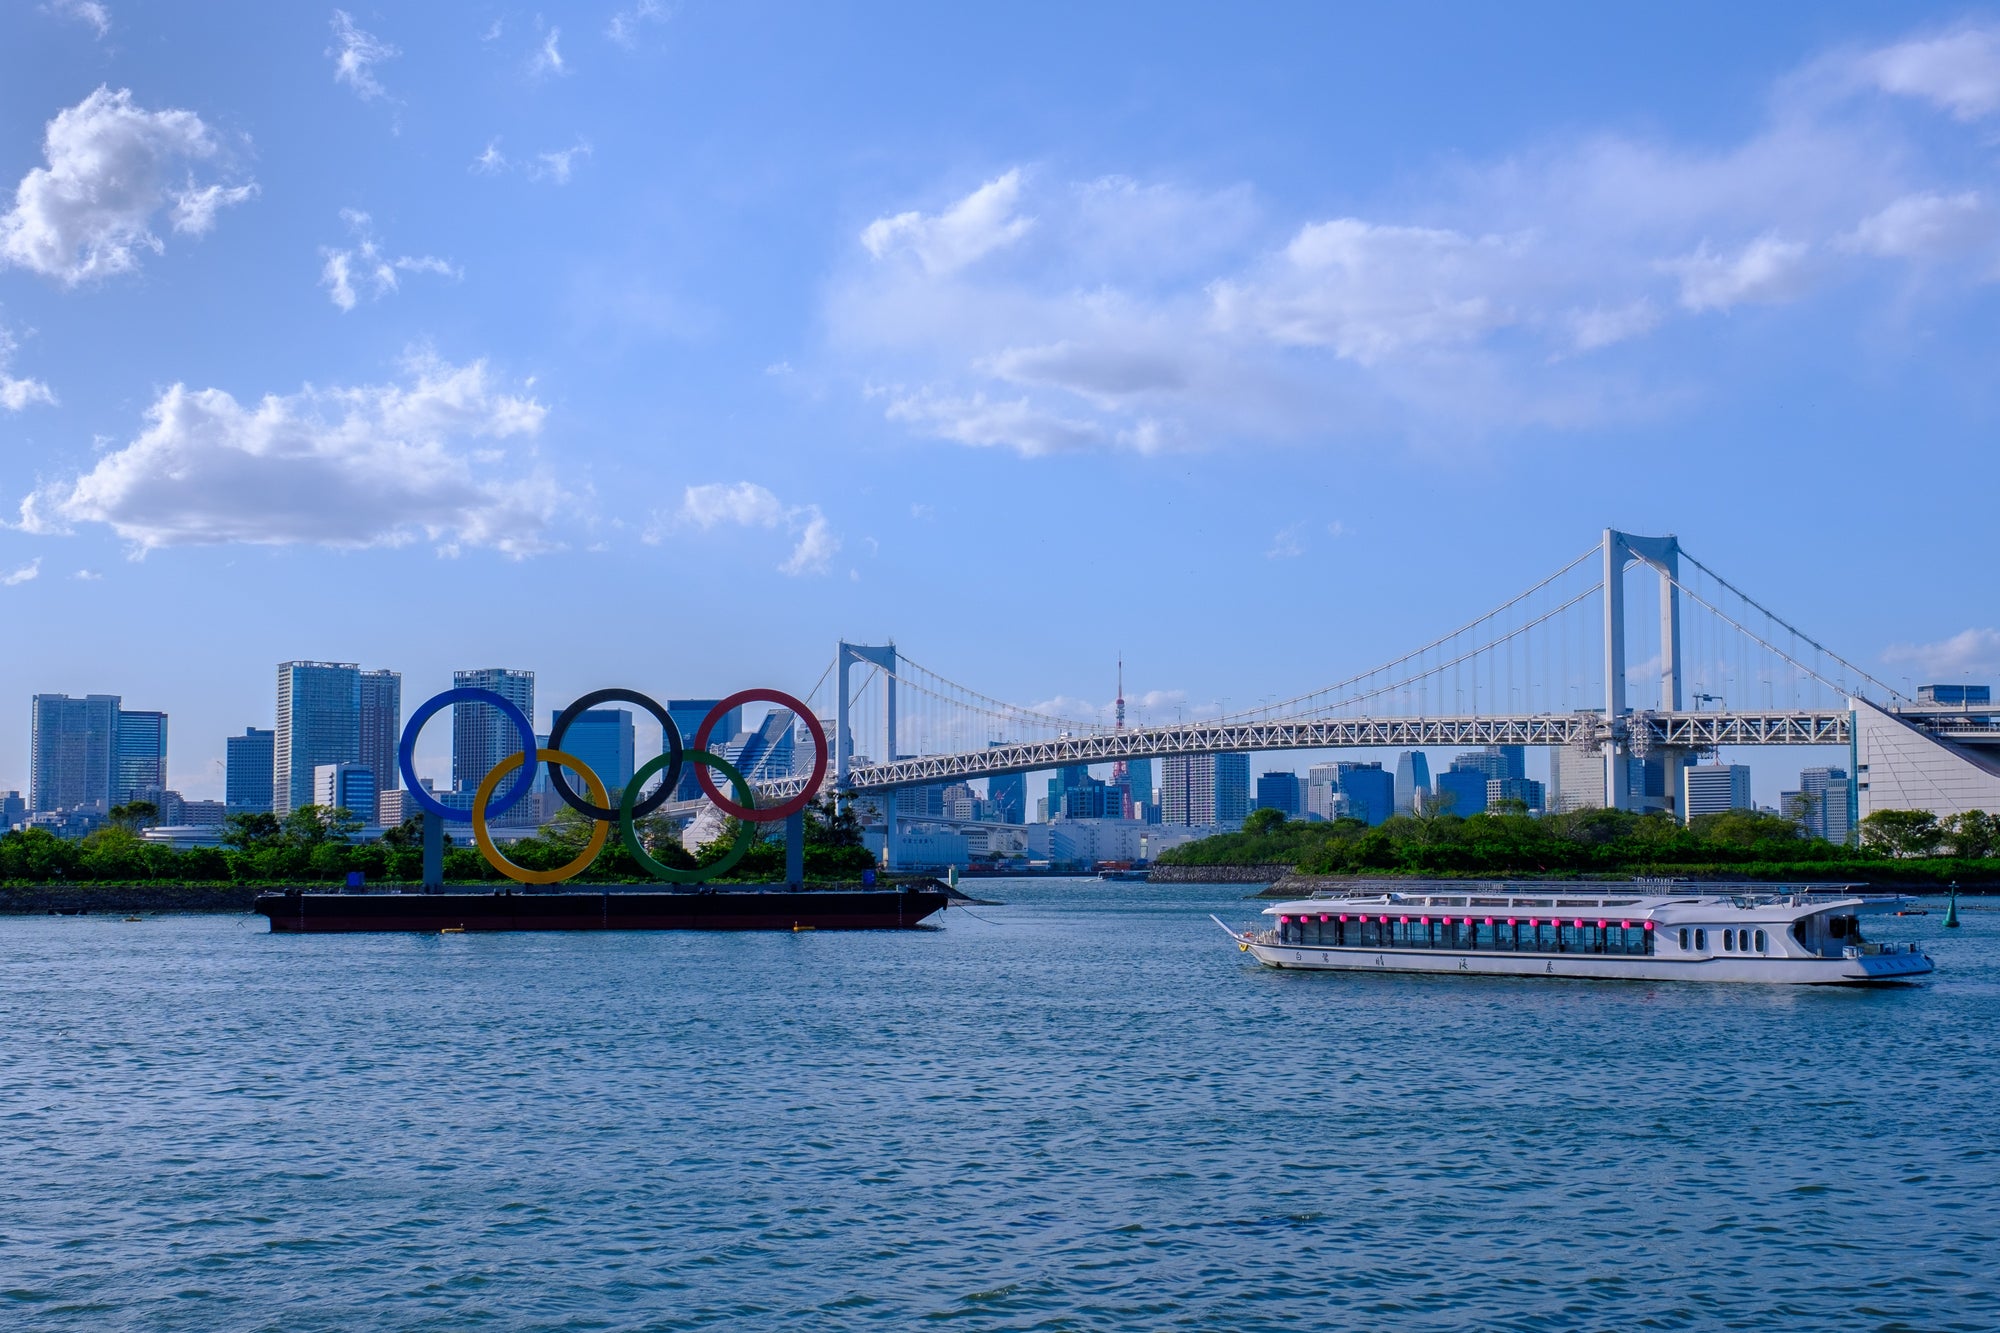 Tokyo Olympics is embracing sustainability...